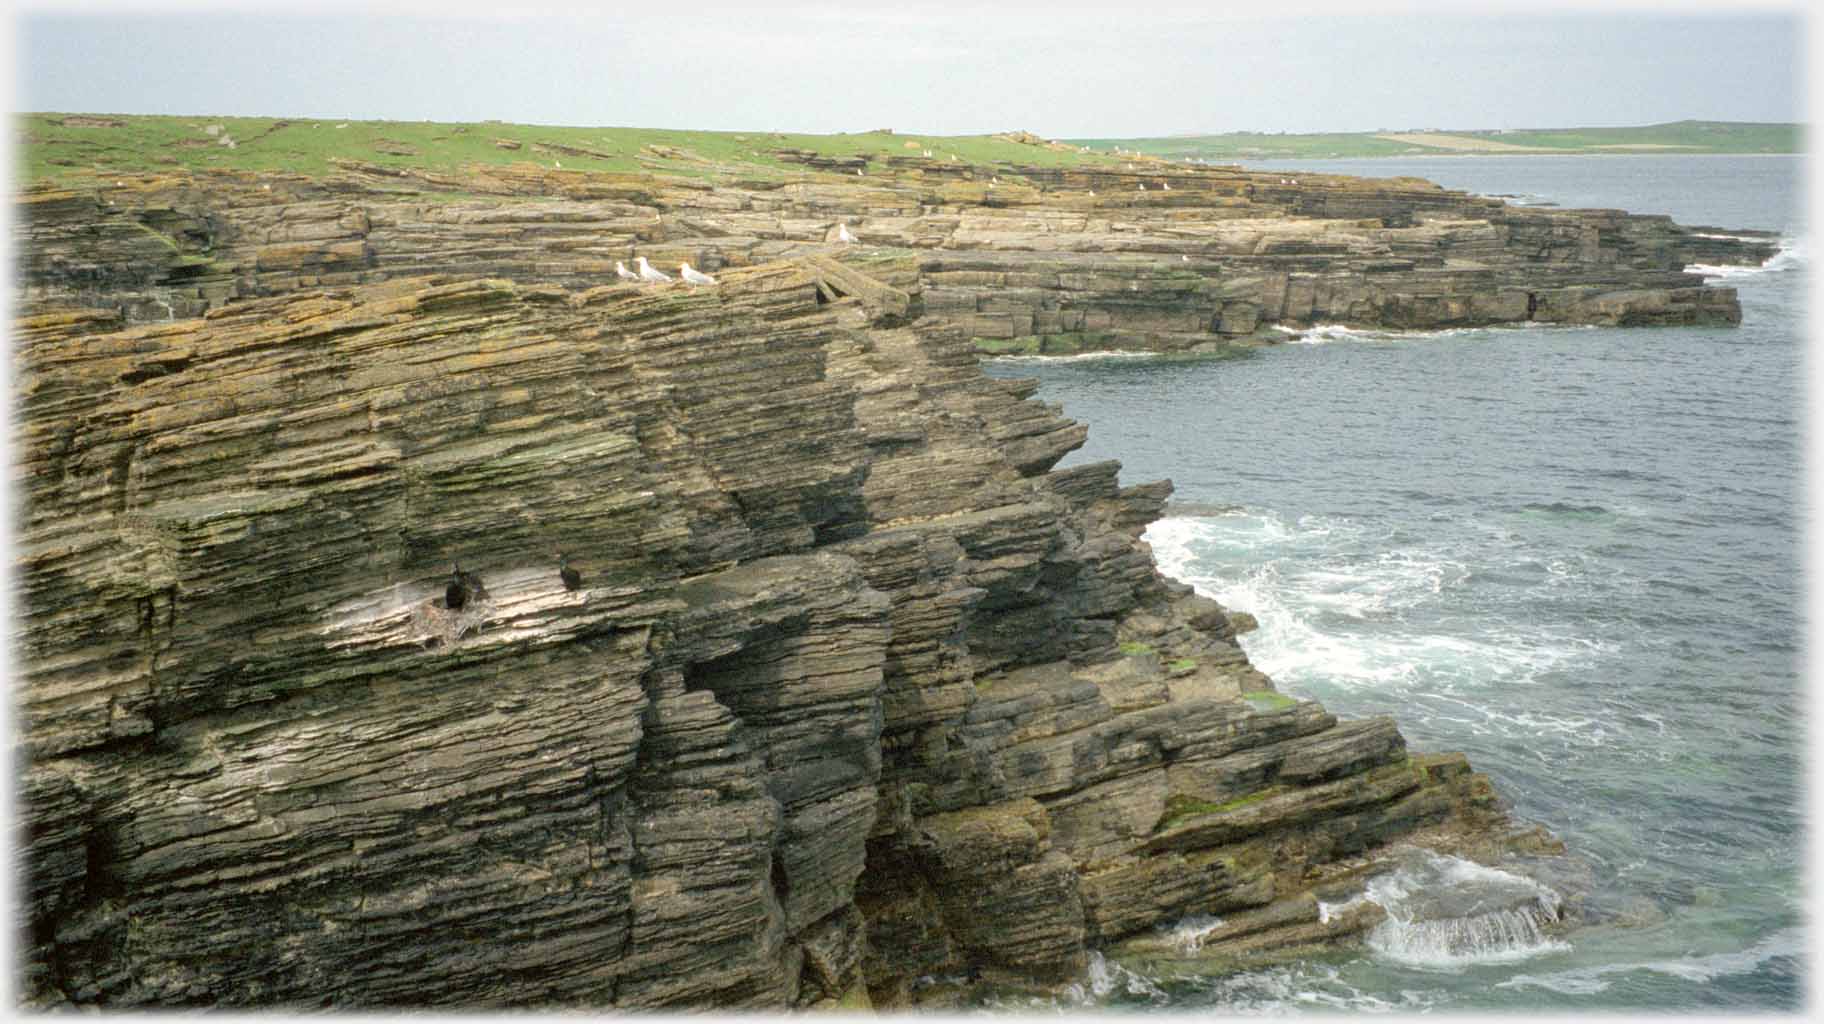 Cliff heavily stratified forming shelves suitable for nesting, sea beyond.